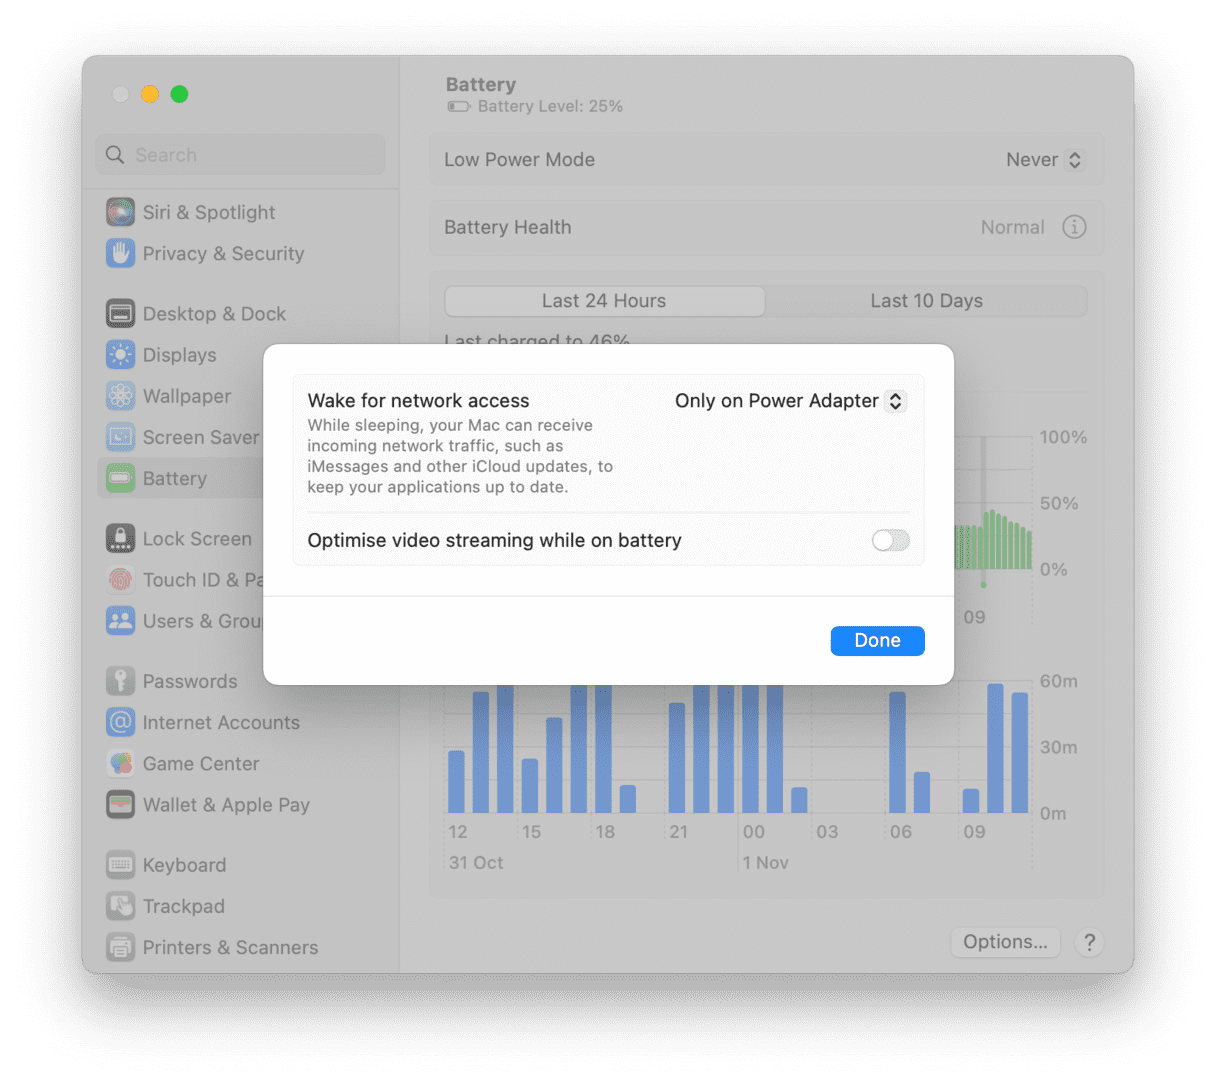 System Preferences - Battery Options